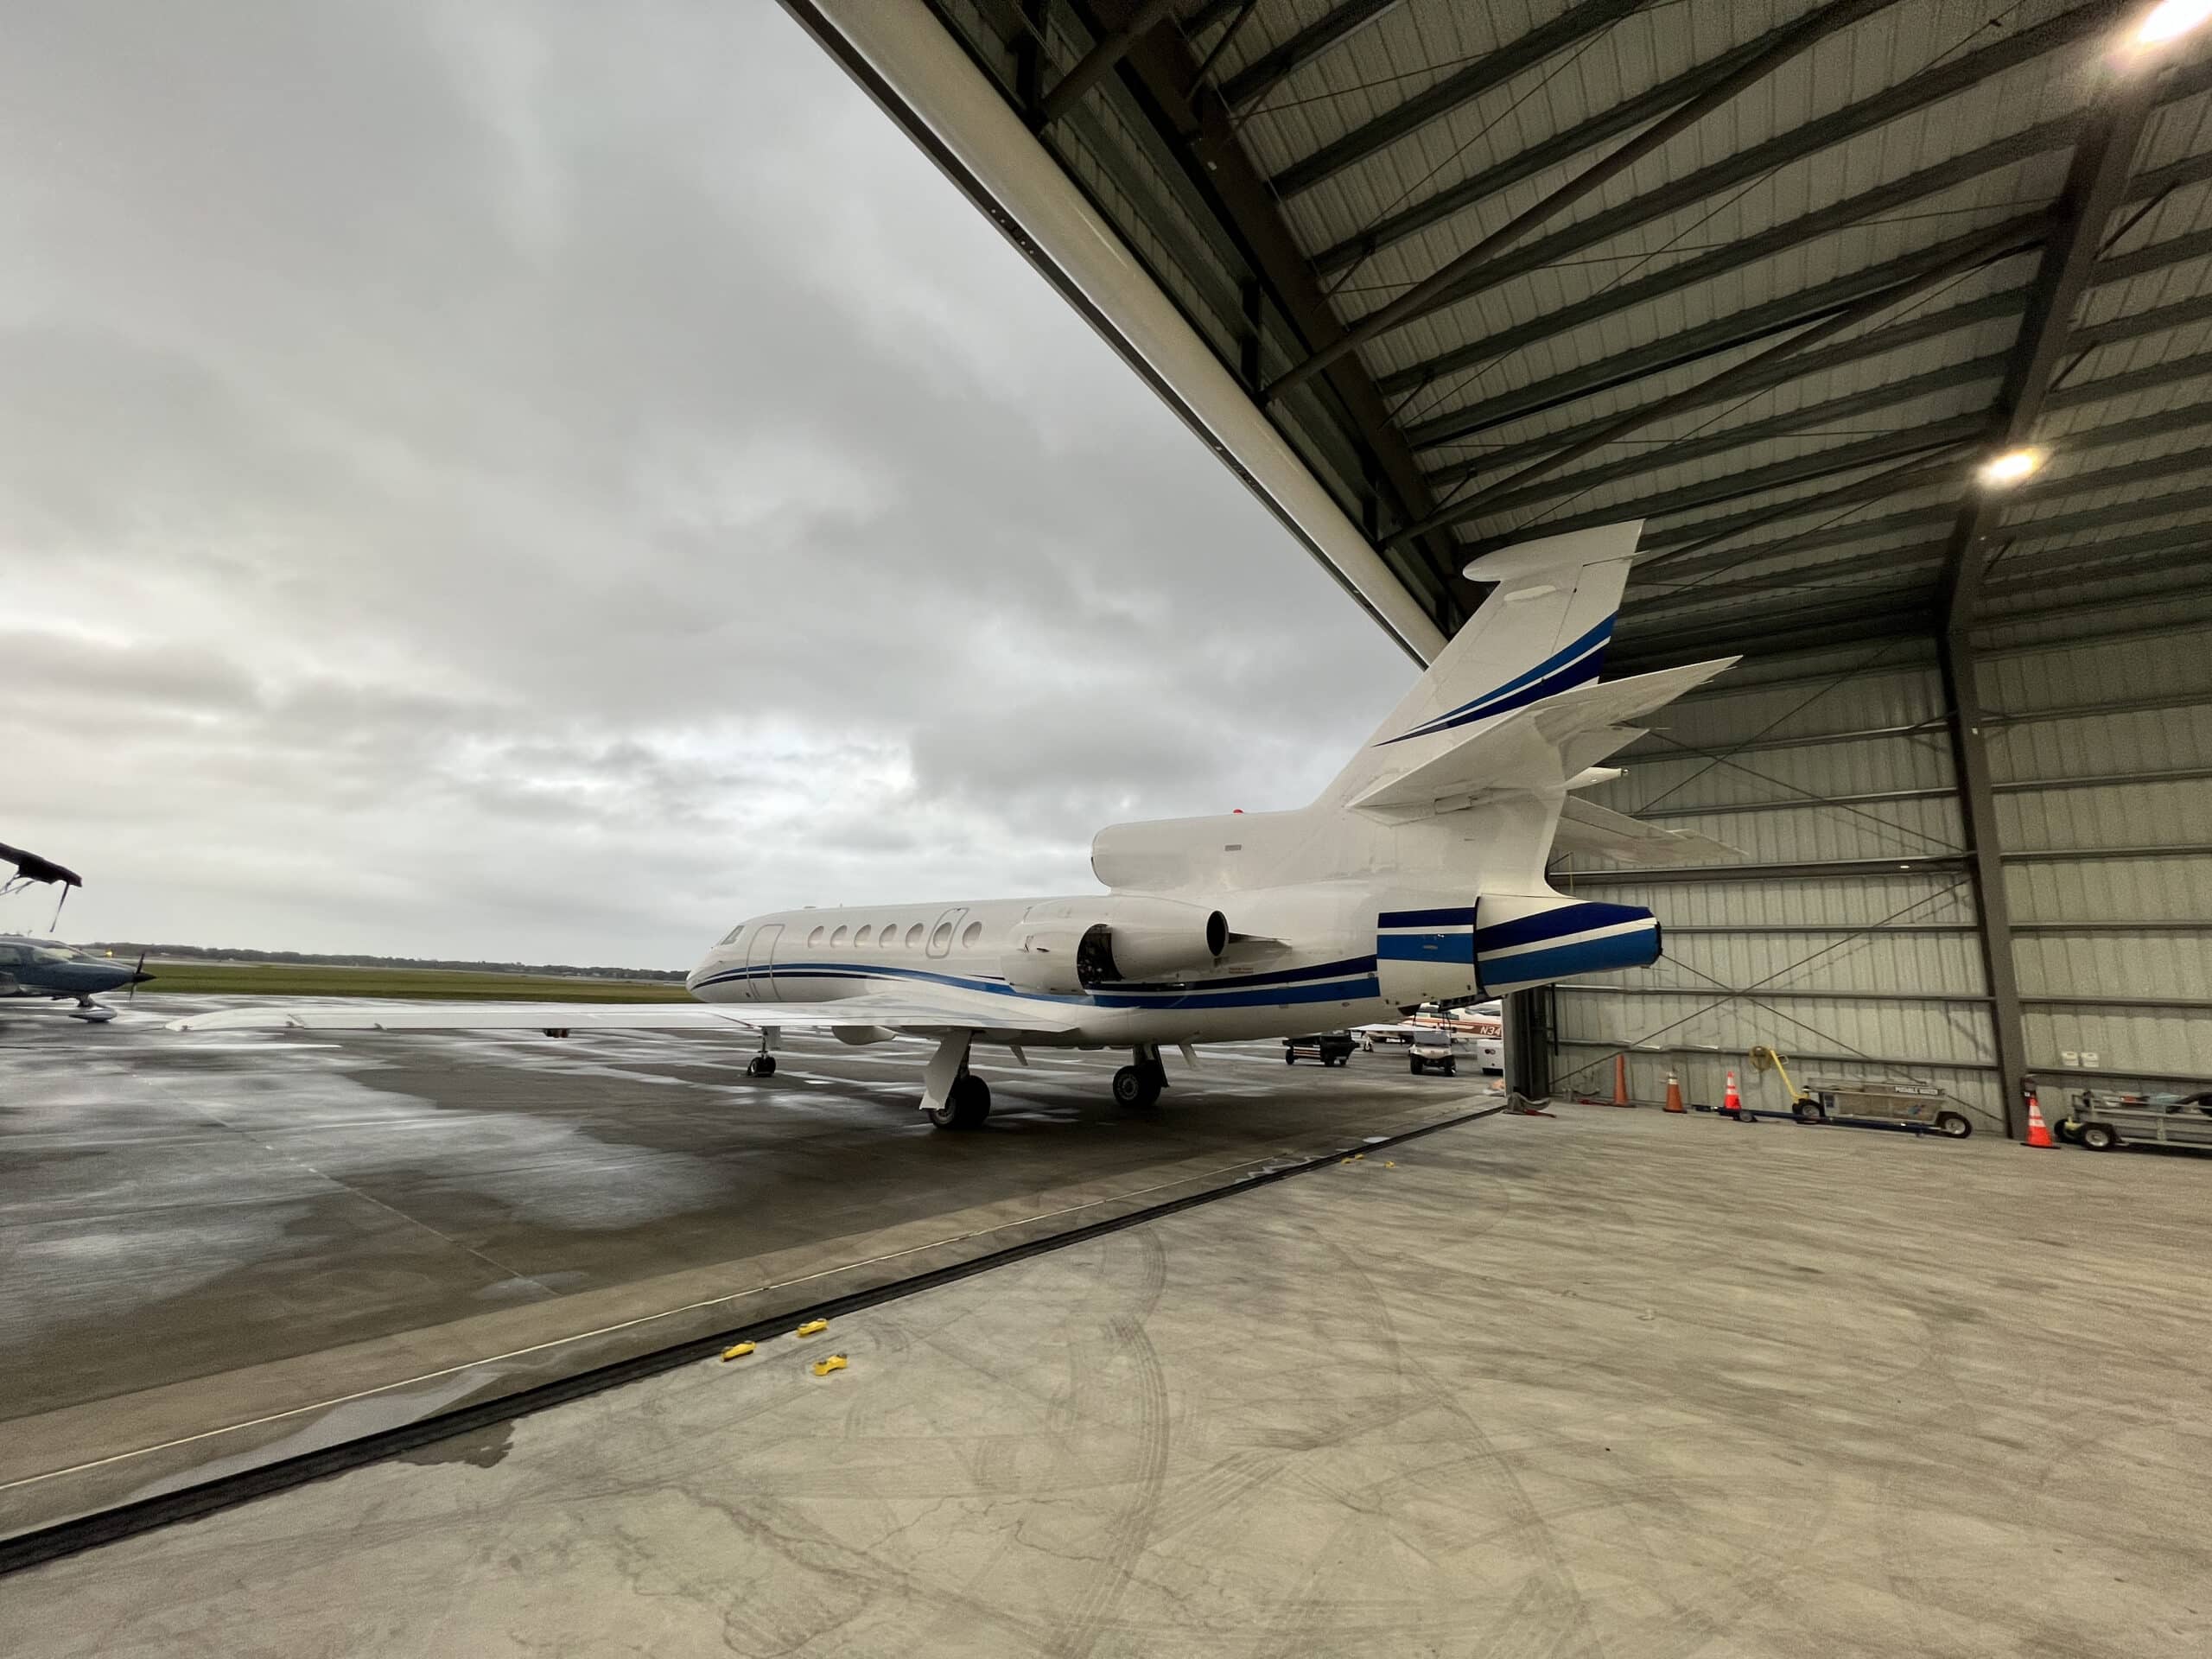 Ensuring the private jet taxis properly after repairing some avionic systems.